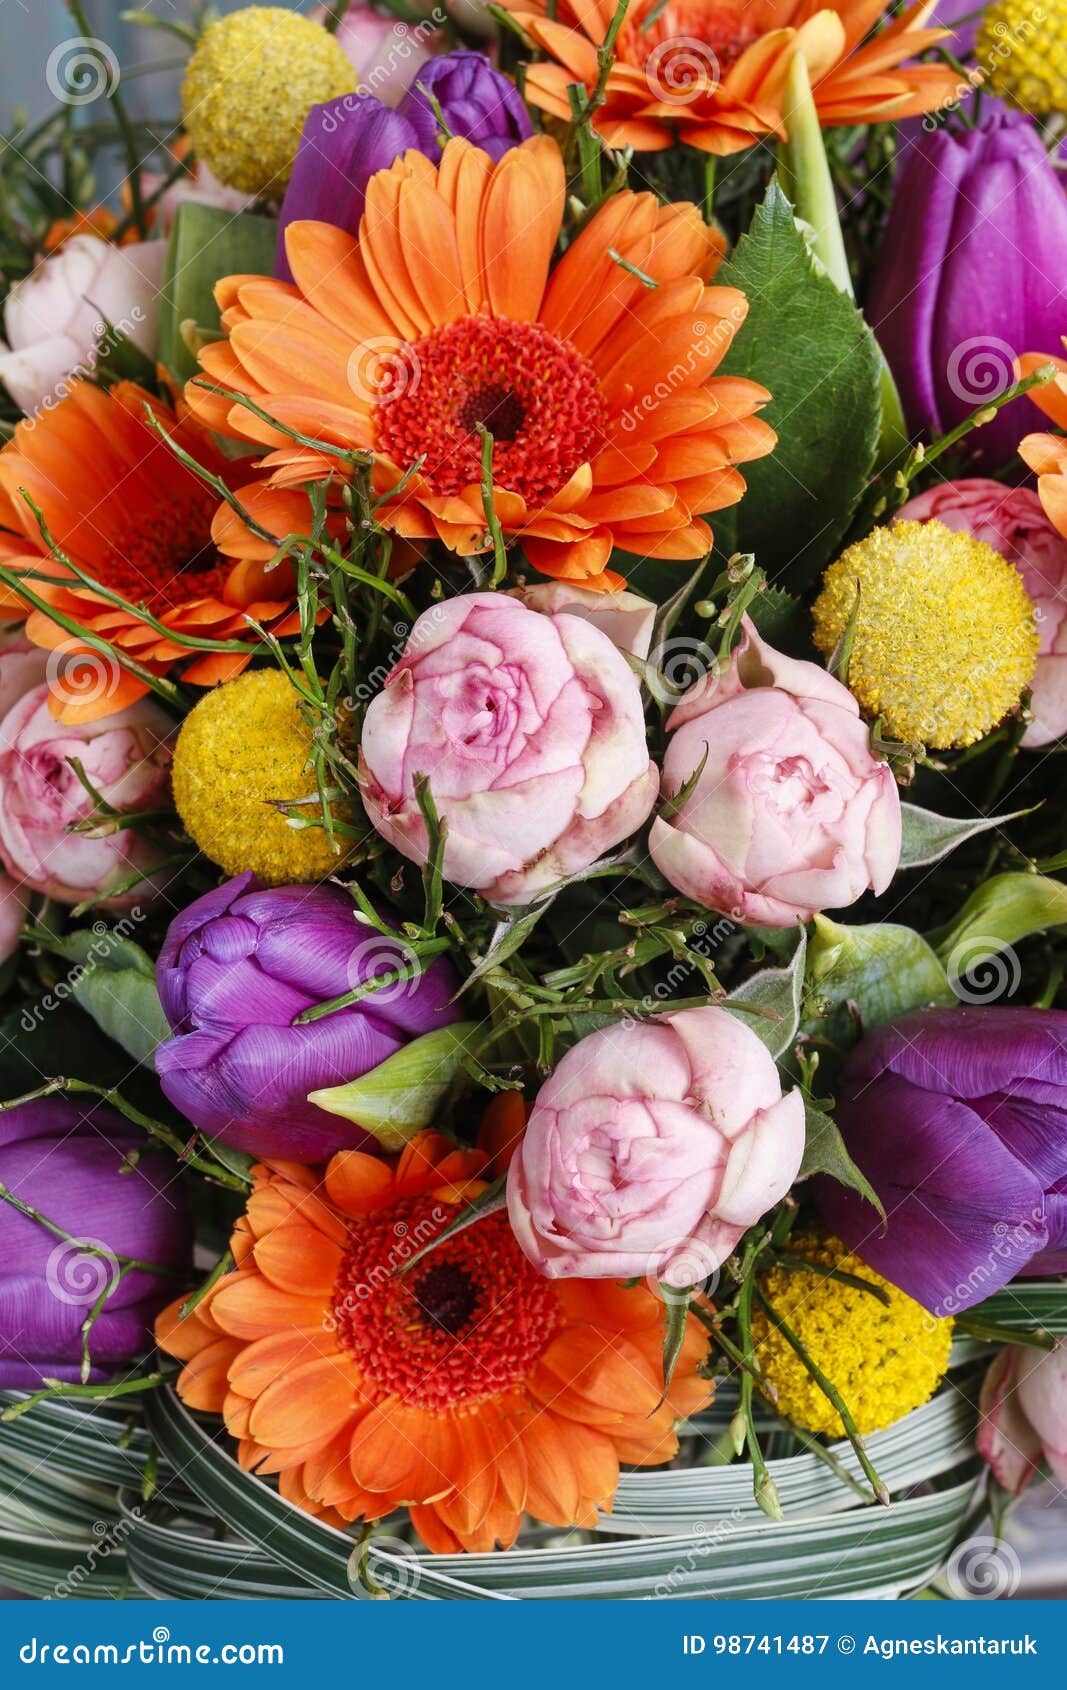 Bouquet Of Orange Gerbera Daisies Violet Tulips And Pink Roses Stock Image Image Of Gift Gerber 98741487